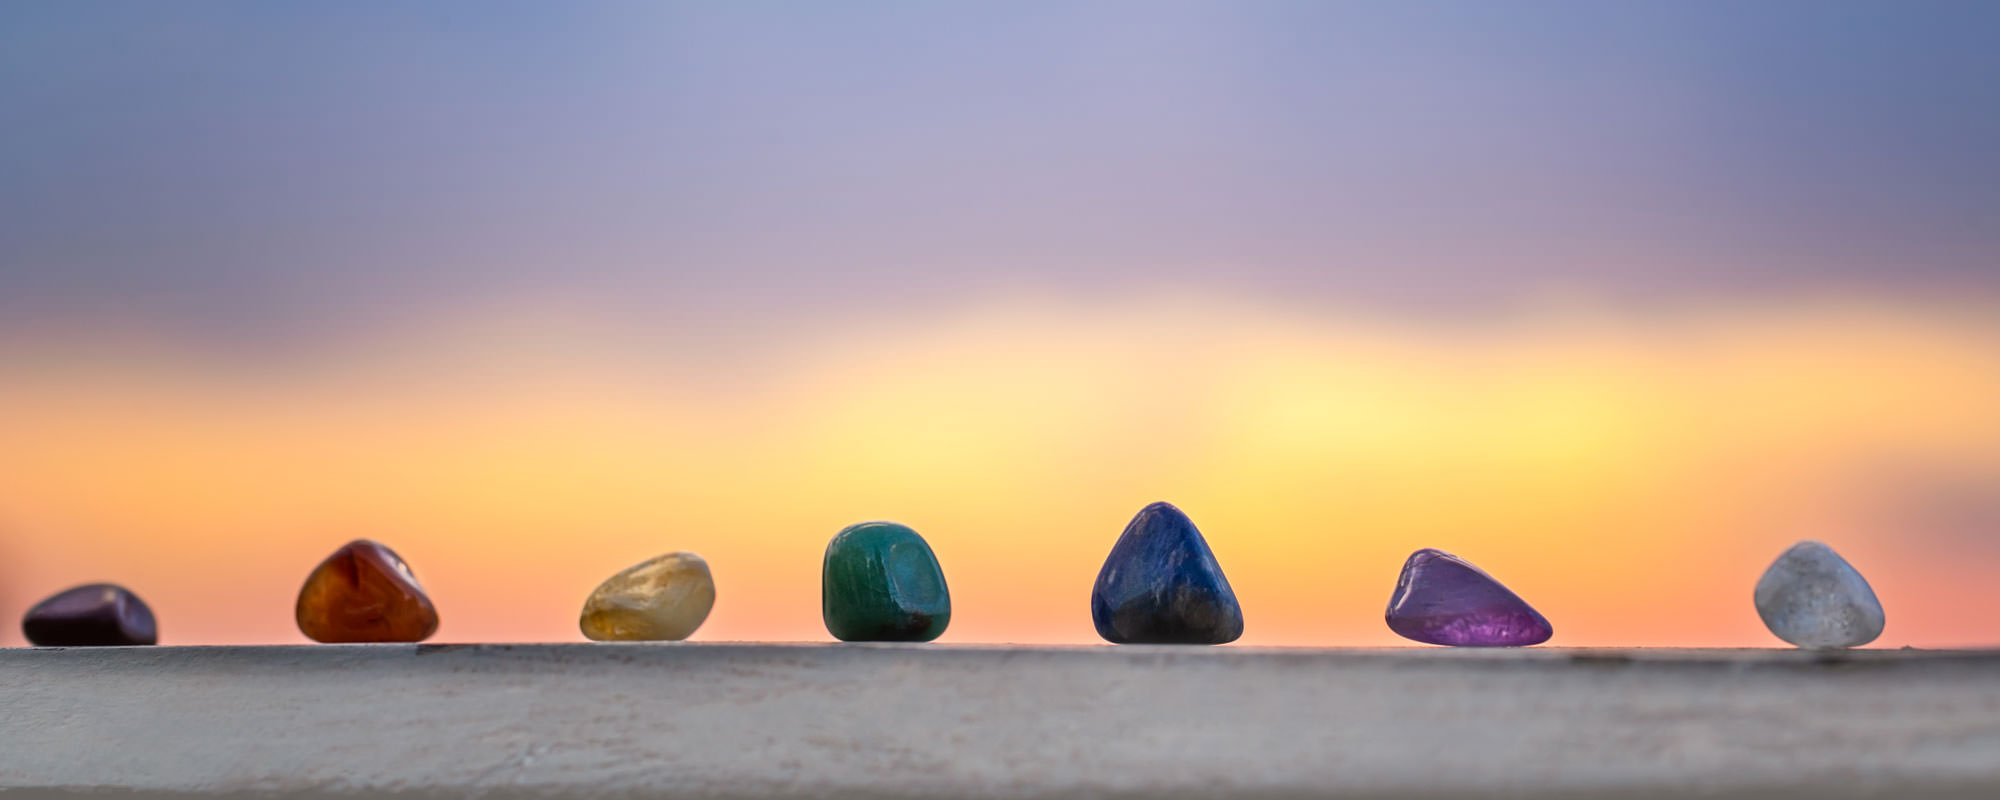 Colorful stones lined up